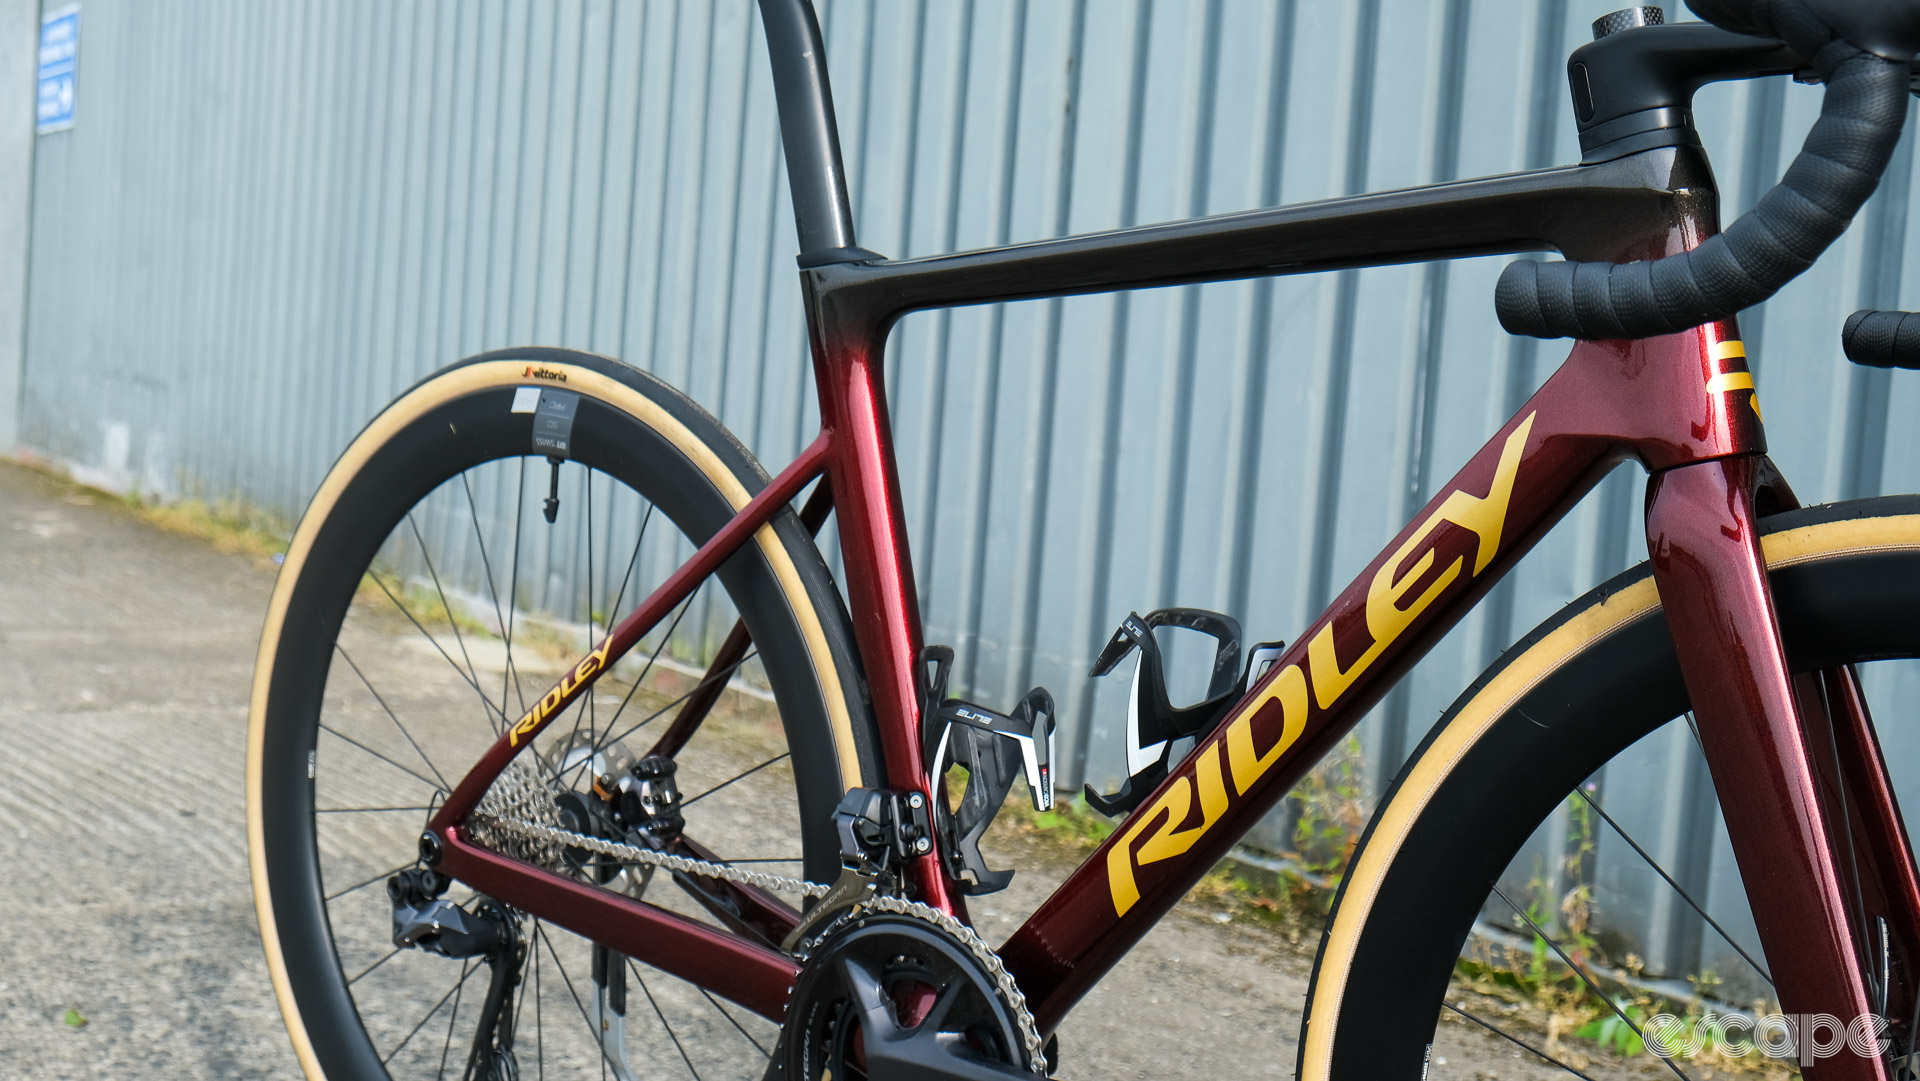 The Falcn RS in profile, showing dropped seat stays, truncated aero-profile tubing, and a top tube Ridley claims helps aid stability in crosswinds.